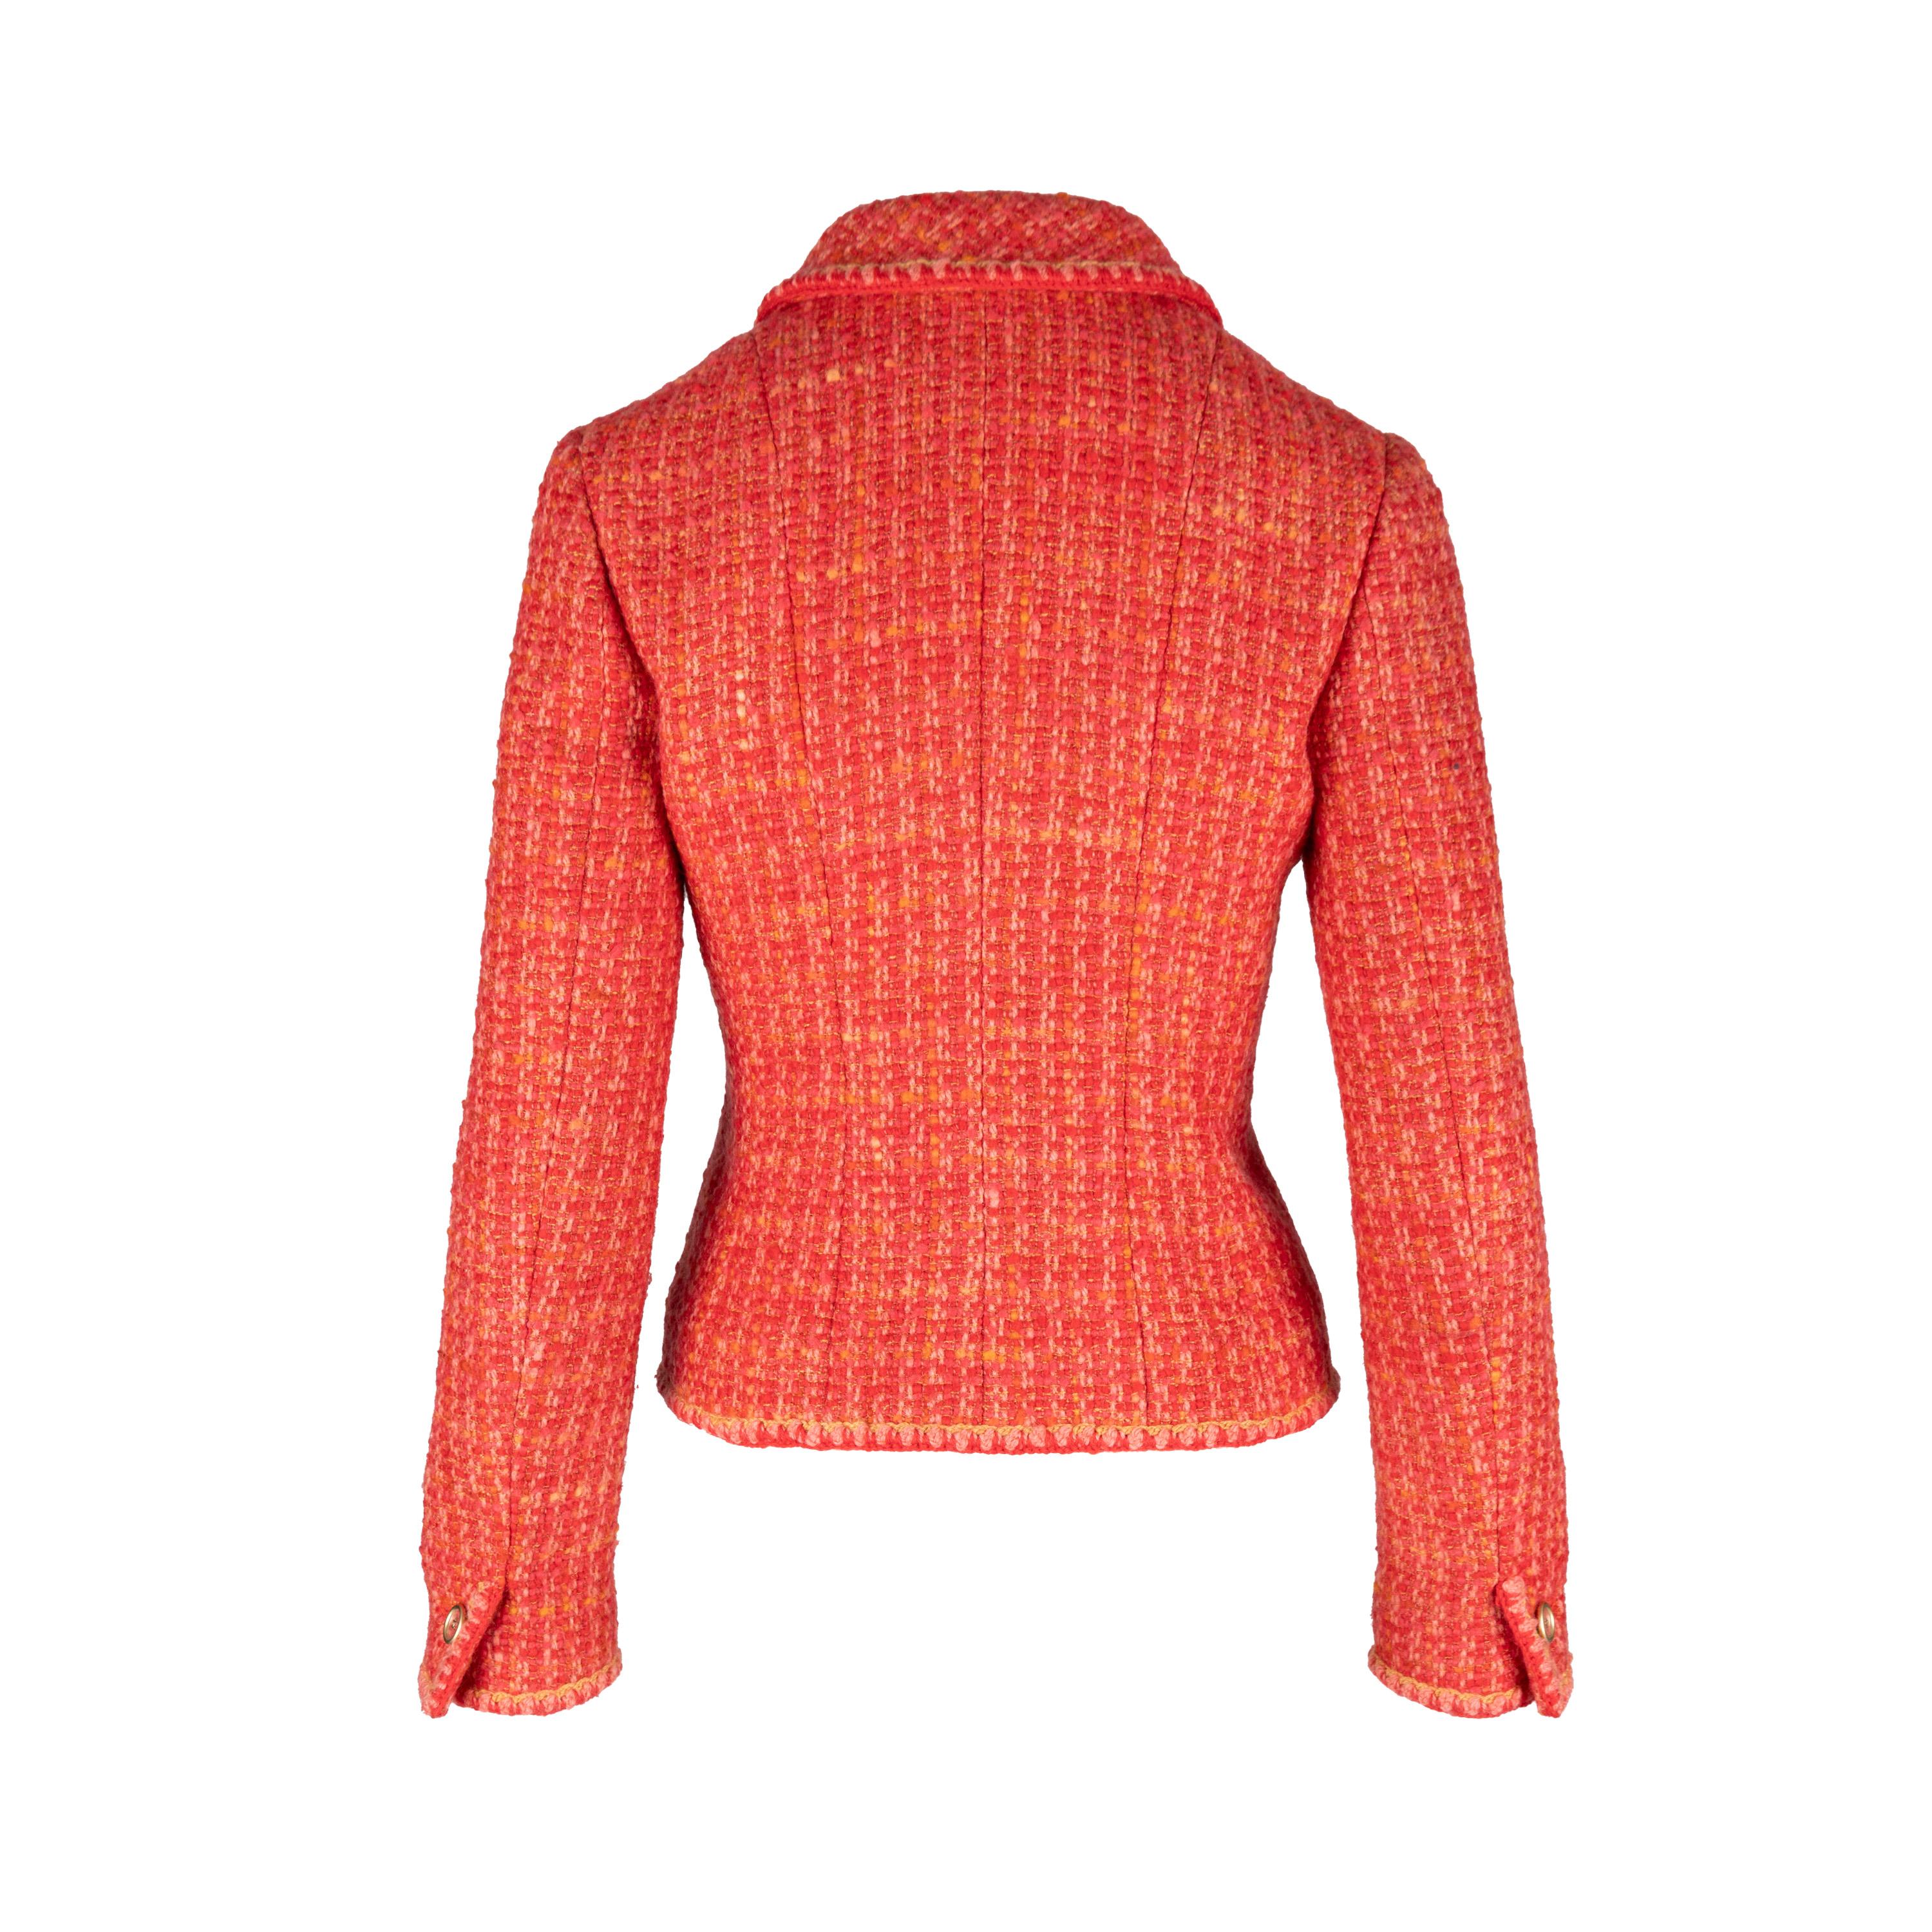 This classic tweed Chanel jacket is tailored for a slim fit, crafted in vivid red wool tweed and adorned with iconic transparent buttons featuring the CC logo. The jacket is further decorated with camelia printed silk lining, notched lapels, and